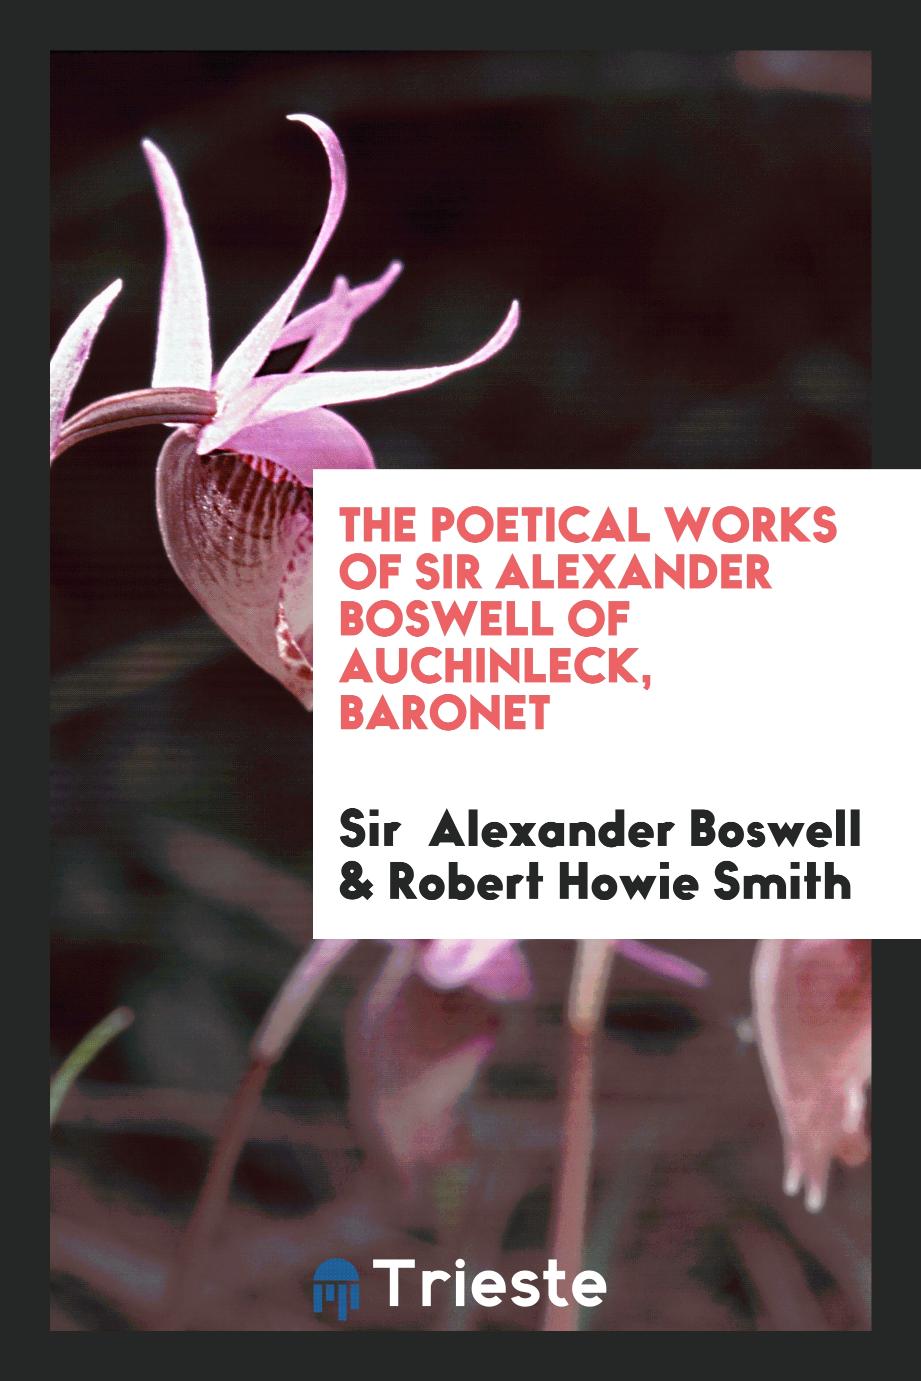 The Poetical works of sir Alexander Boswell of auchinleck, baronet